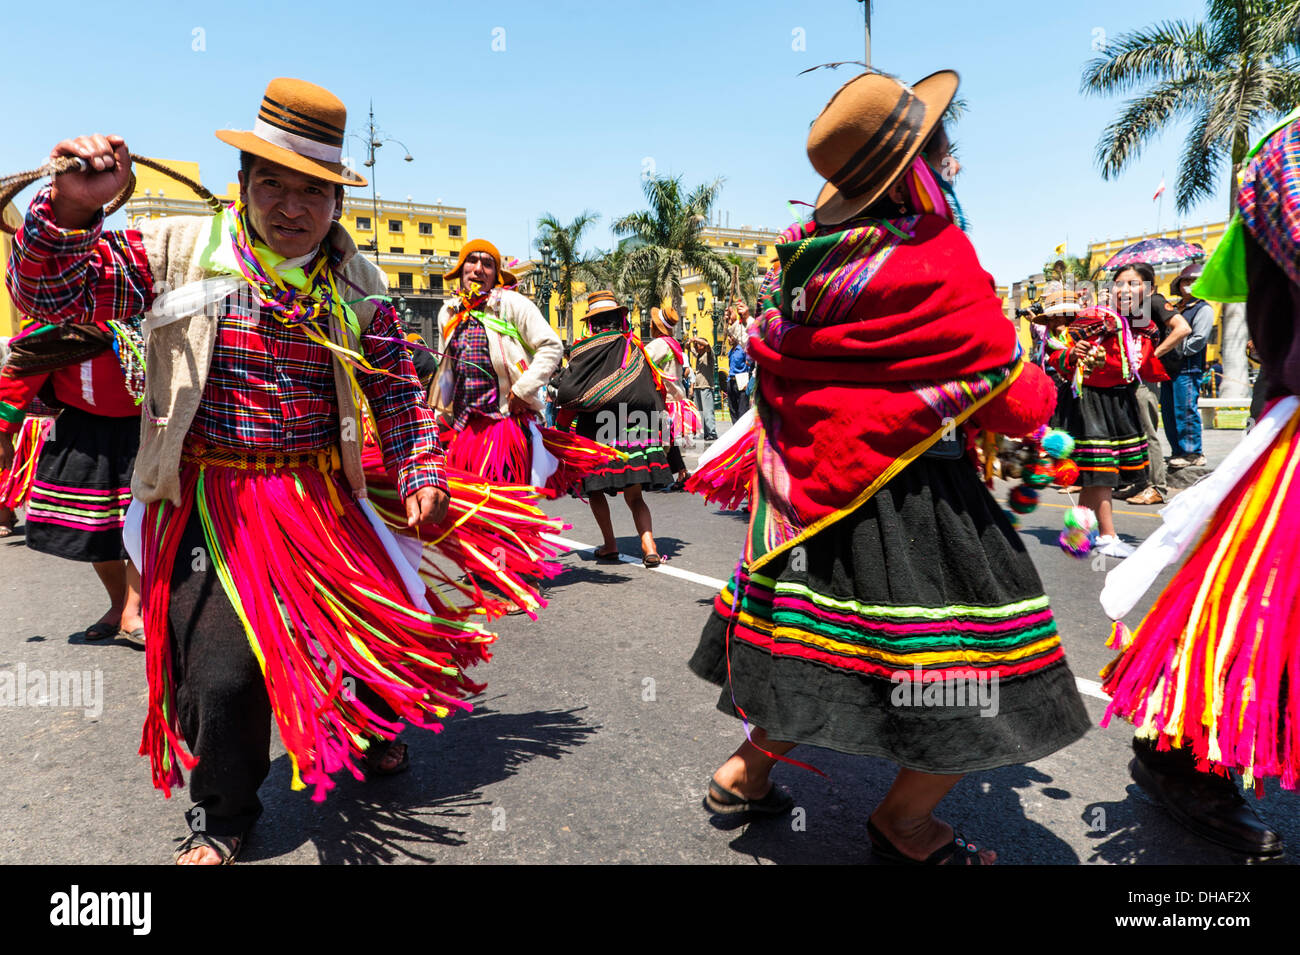 Indians in traditional peruvian dresses dancing in the square Plaza de Armas, Lima, Peru Stock Photo